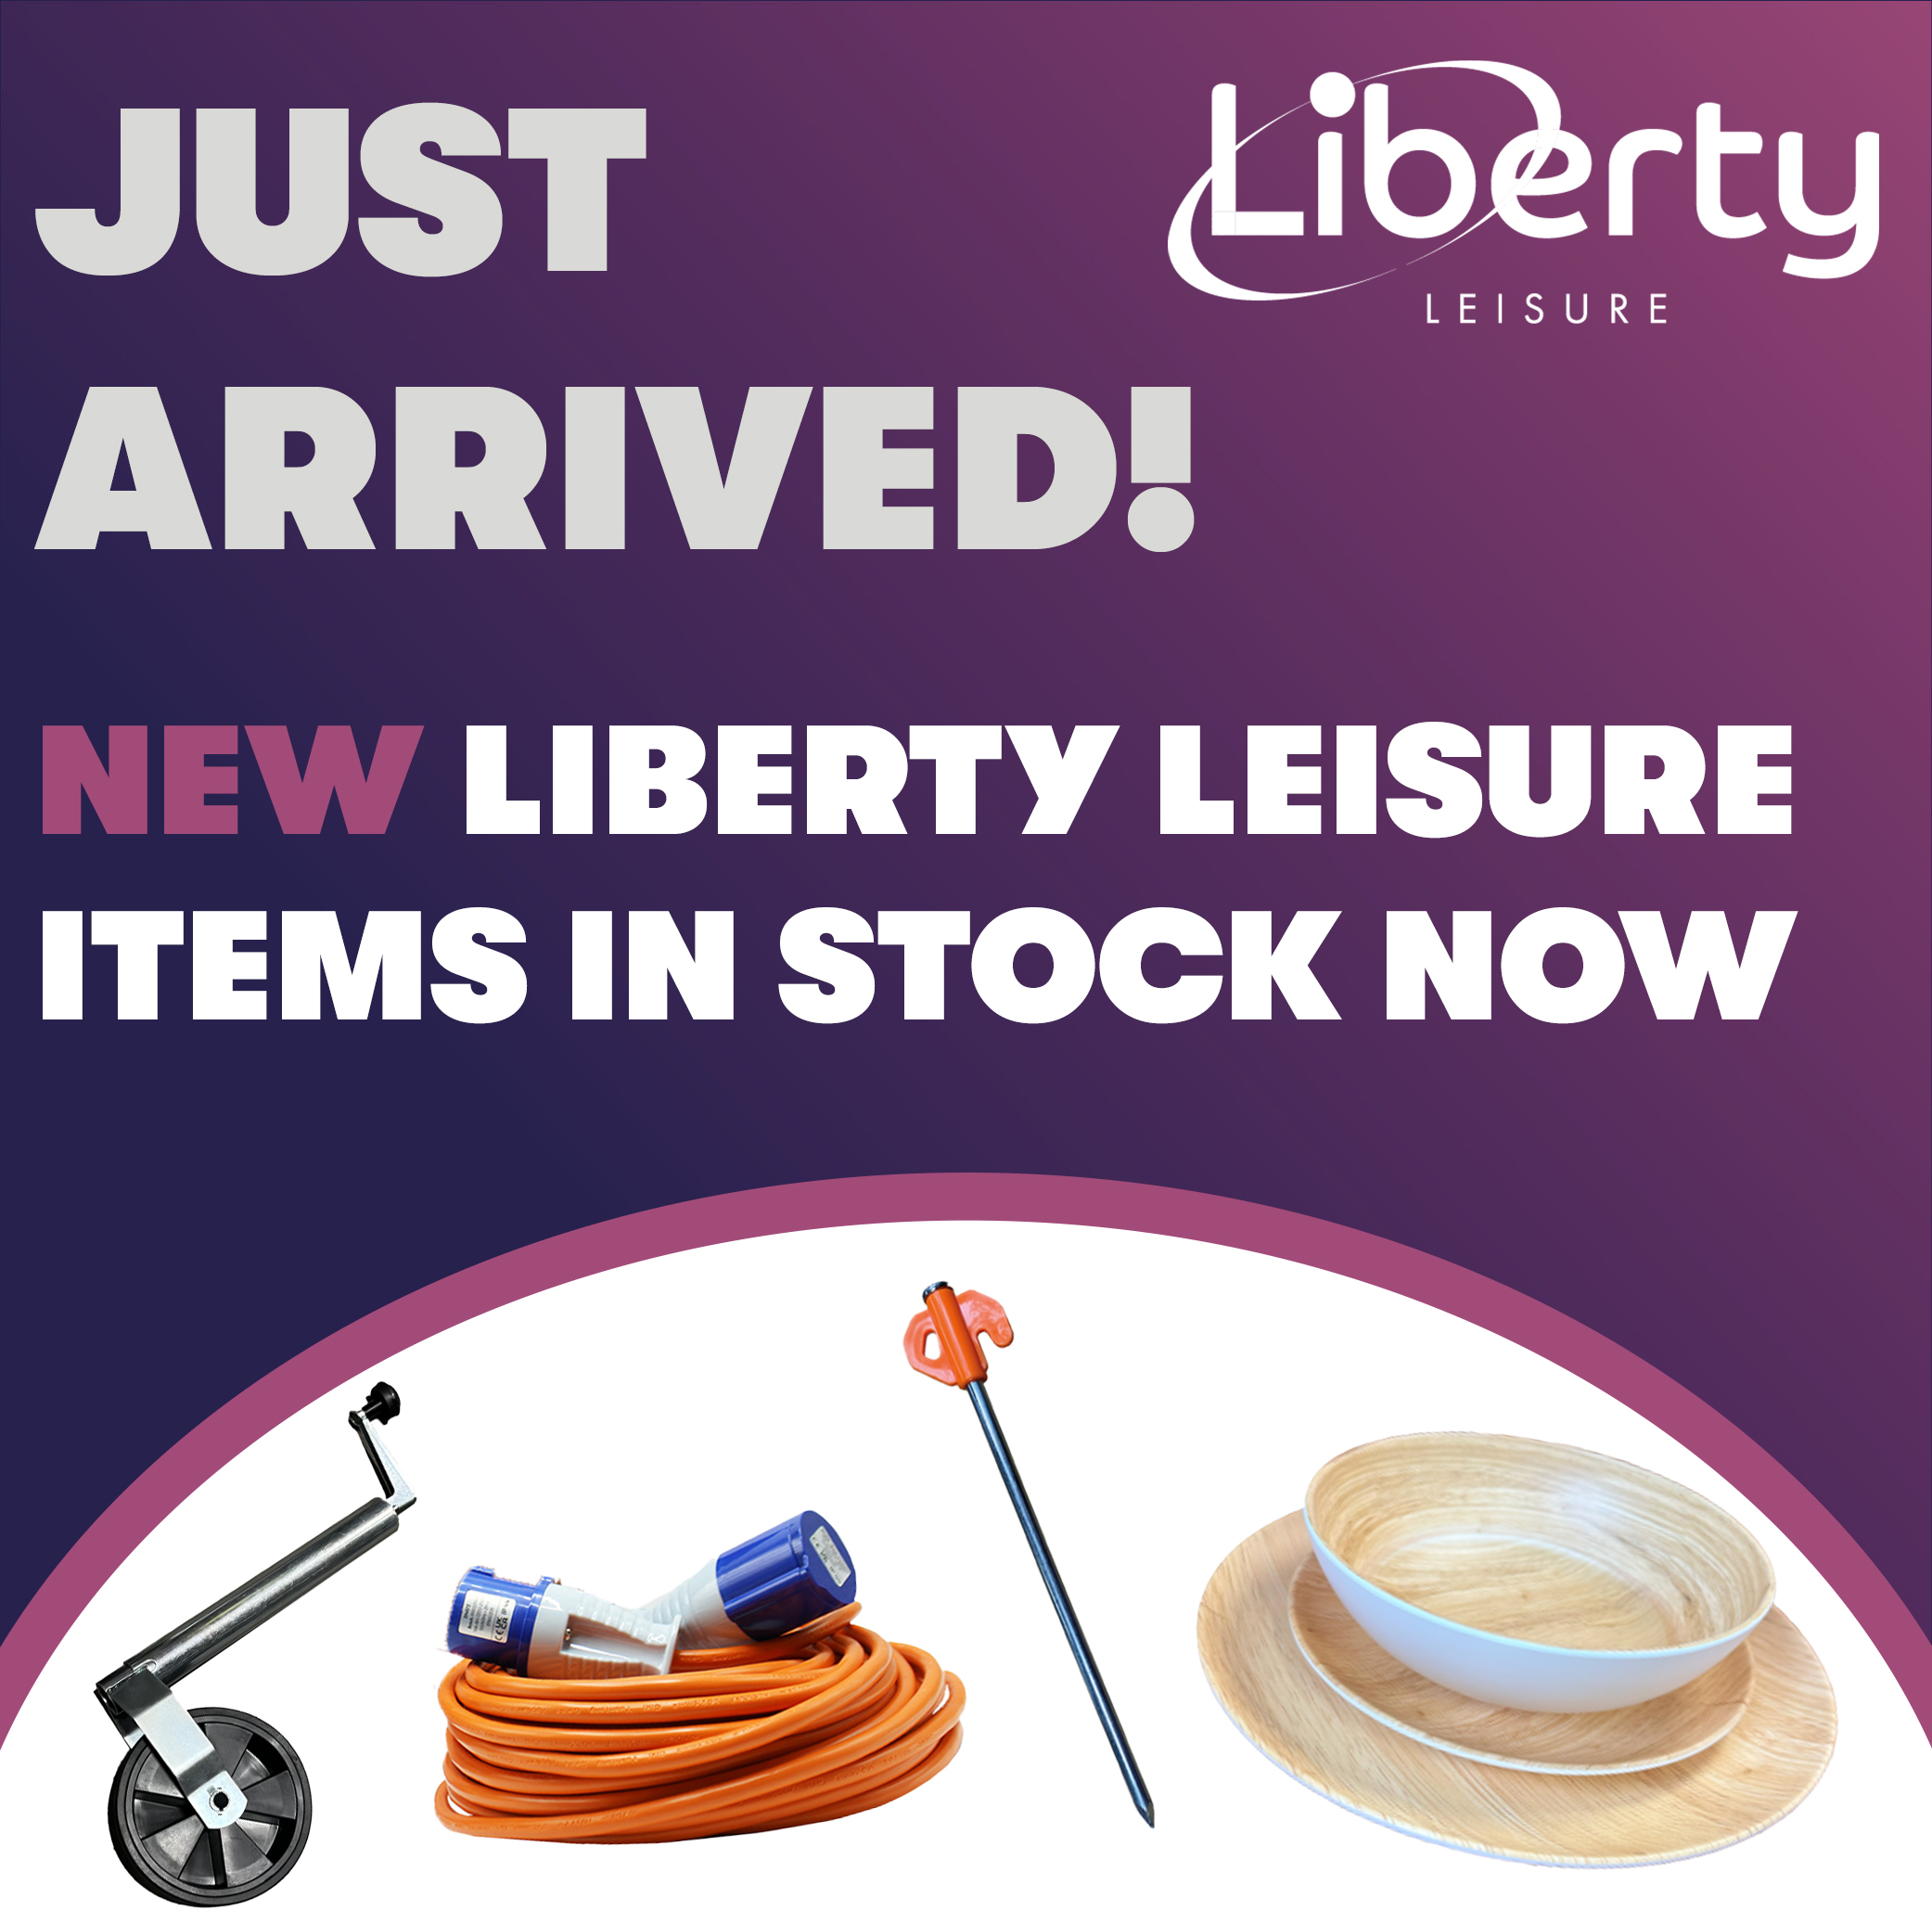 New liberty leisure items, in stock now